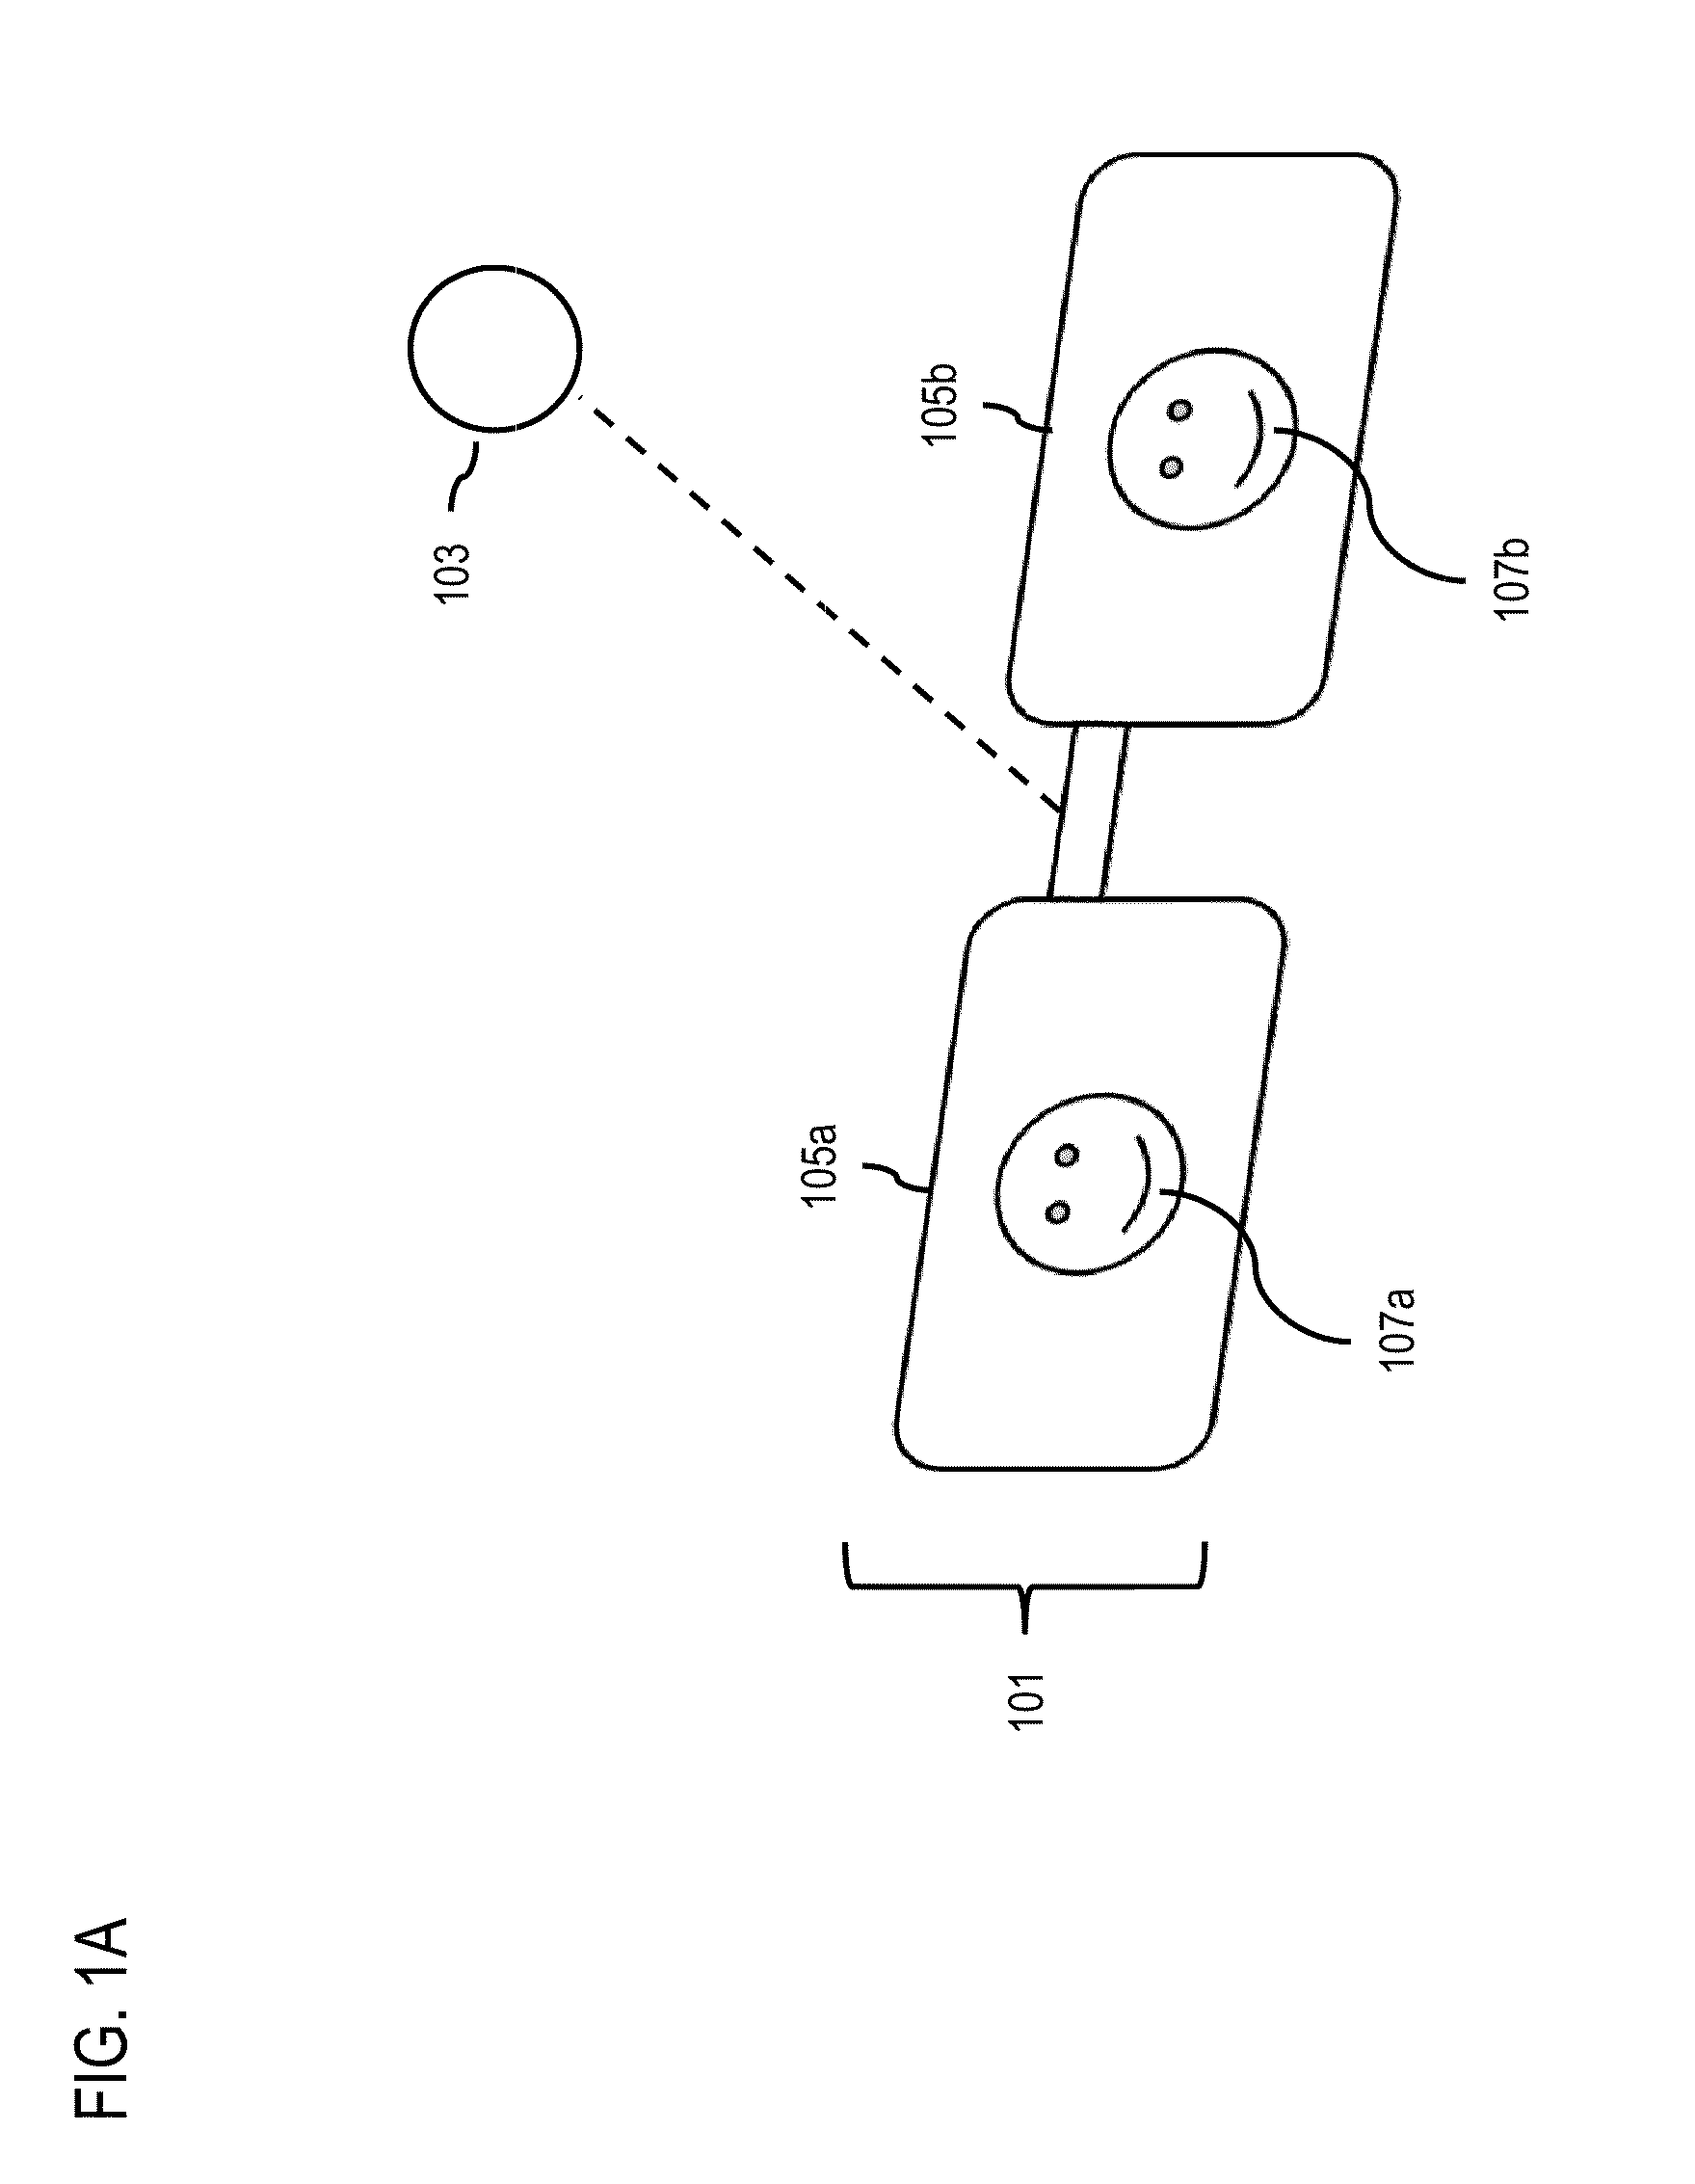 Method and apparatus for determining representations of displayed information based on focus distance